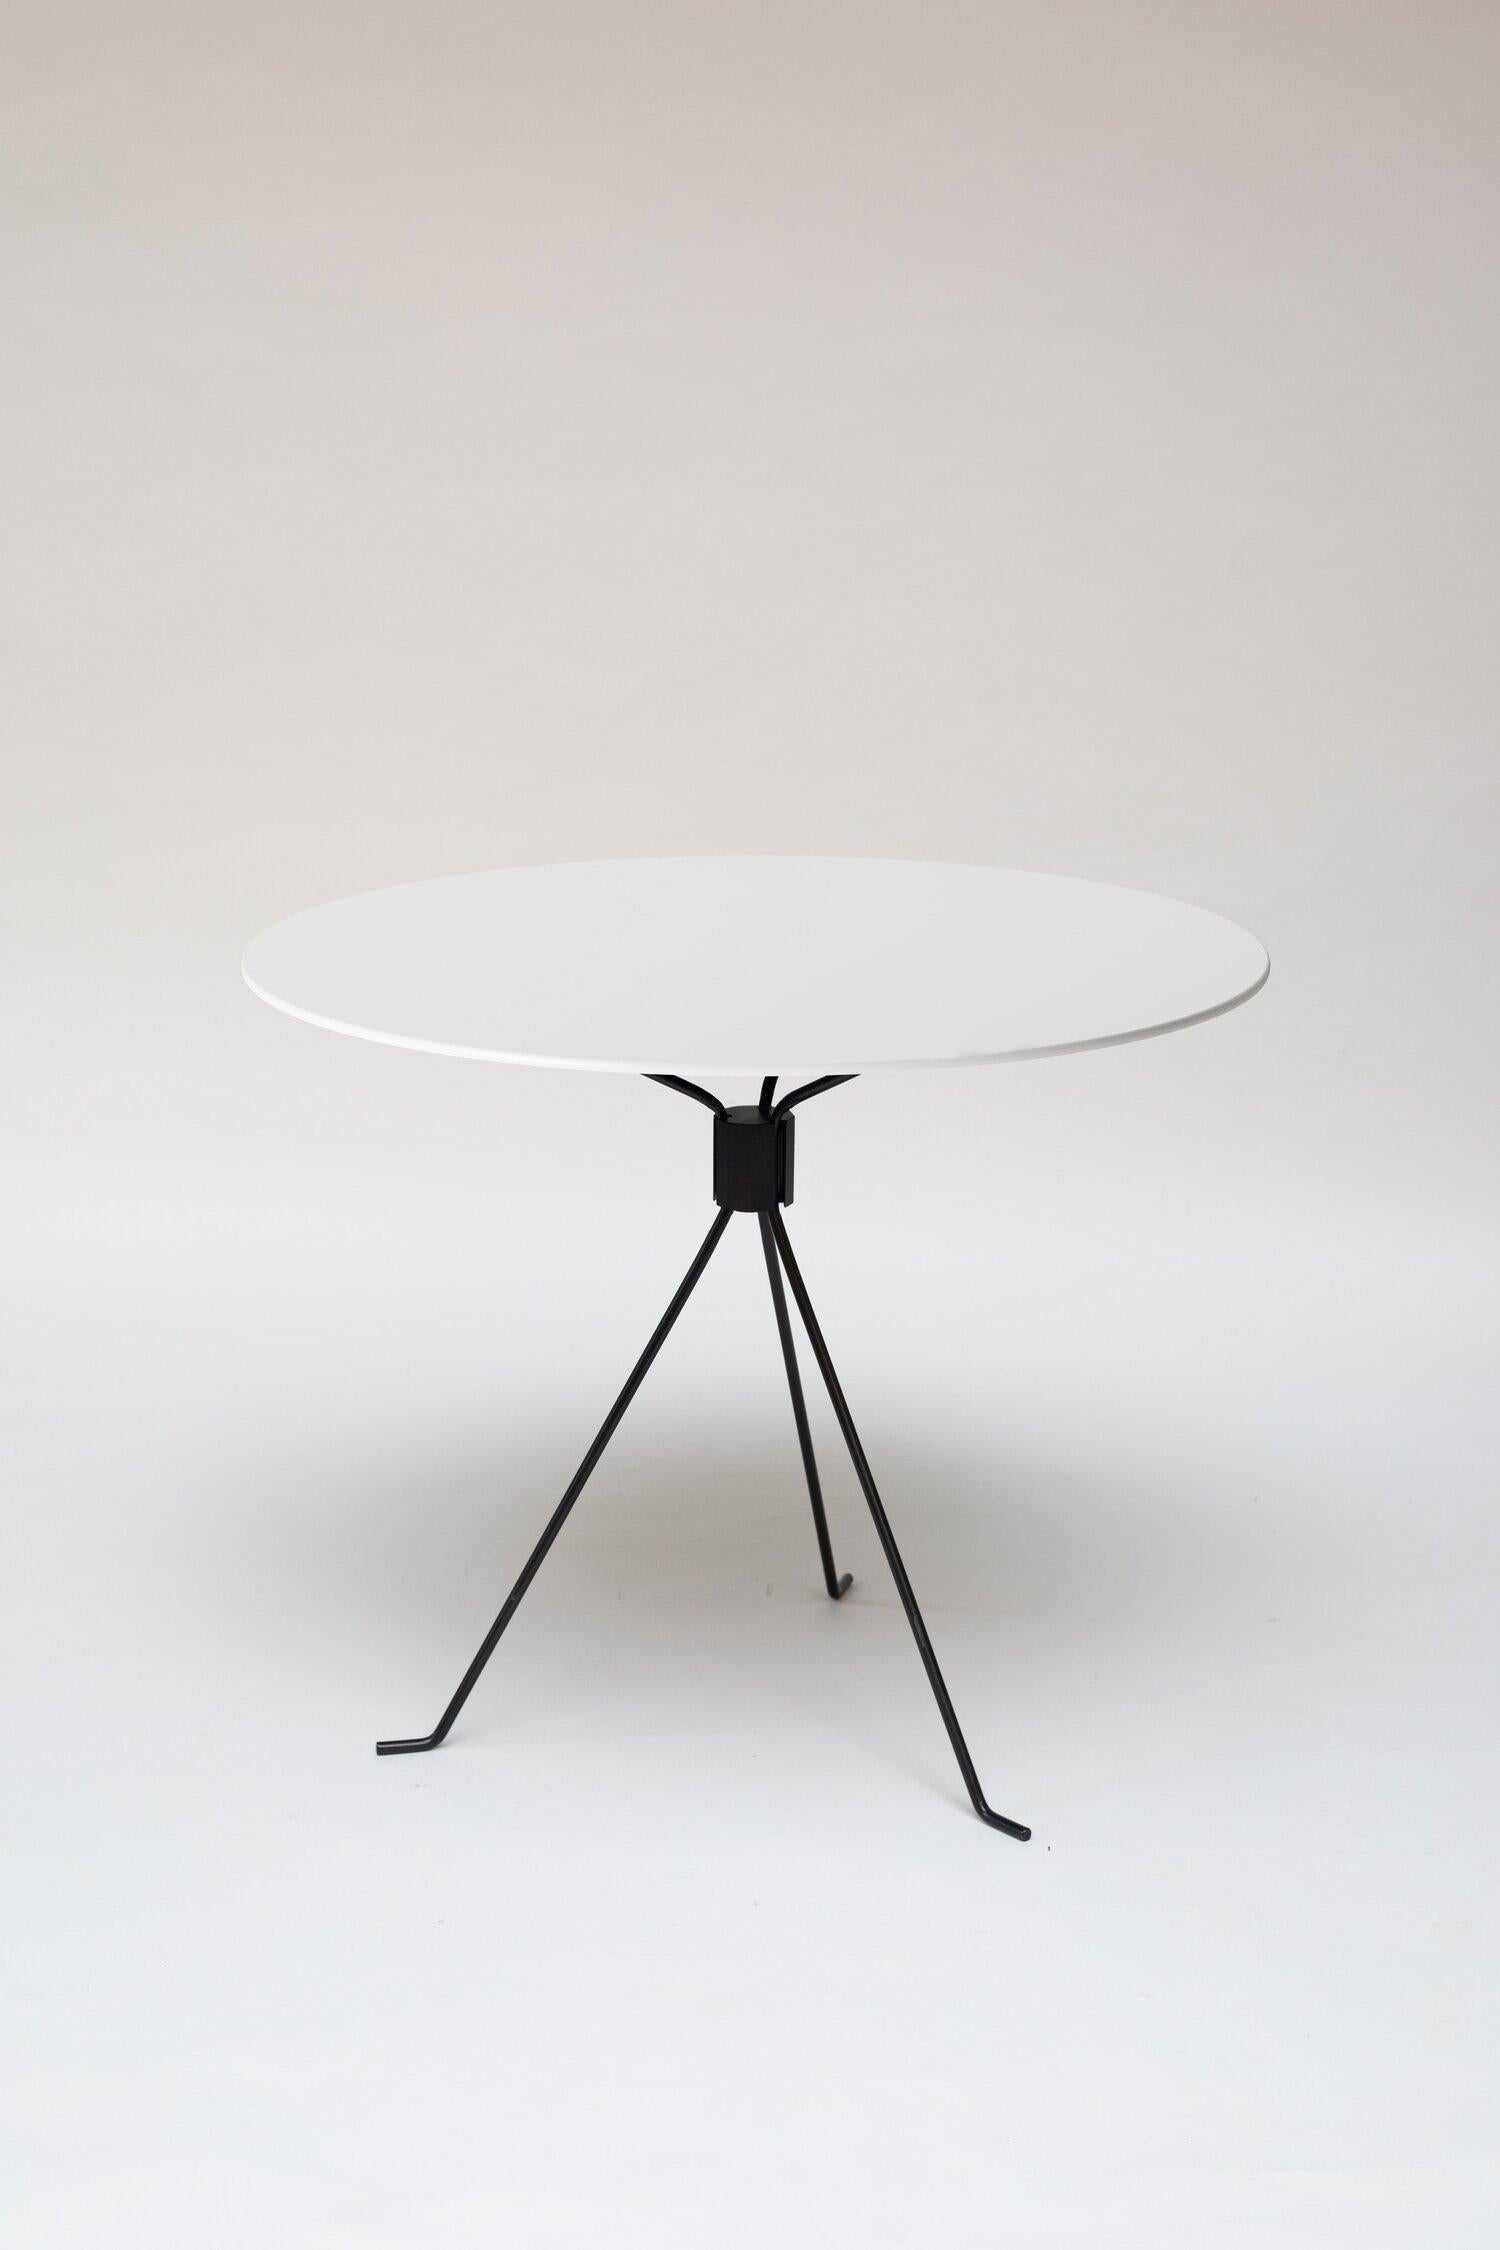 White Capri bond table by Cools Collection
Materials: Steel, paint.
Dimensions: Ø 90 x H 74 cm.
Available in black or white table top.

COOLS Collection was launched in 2020 by mother-and-daughter duo Stefania Andorlini and Maria Francesca